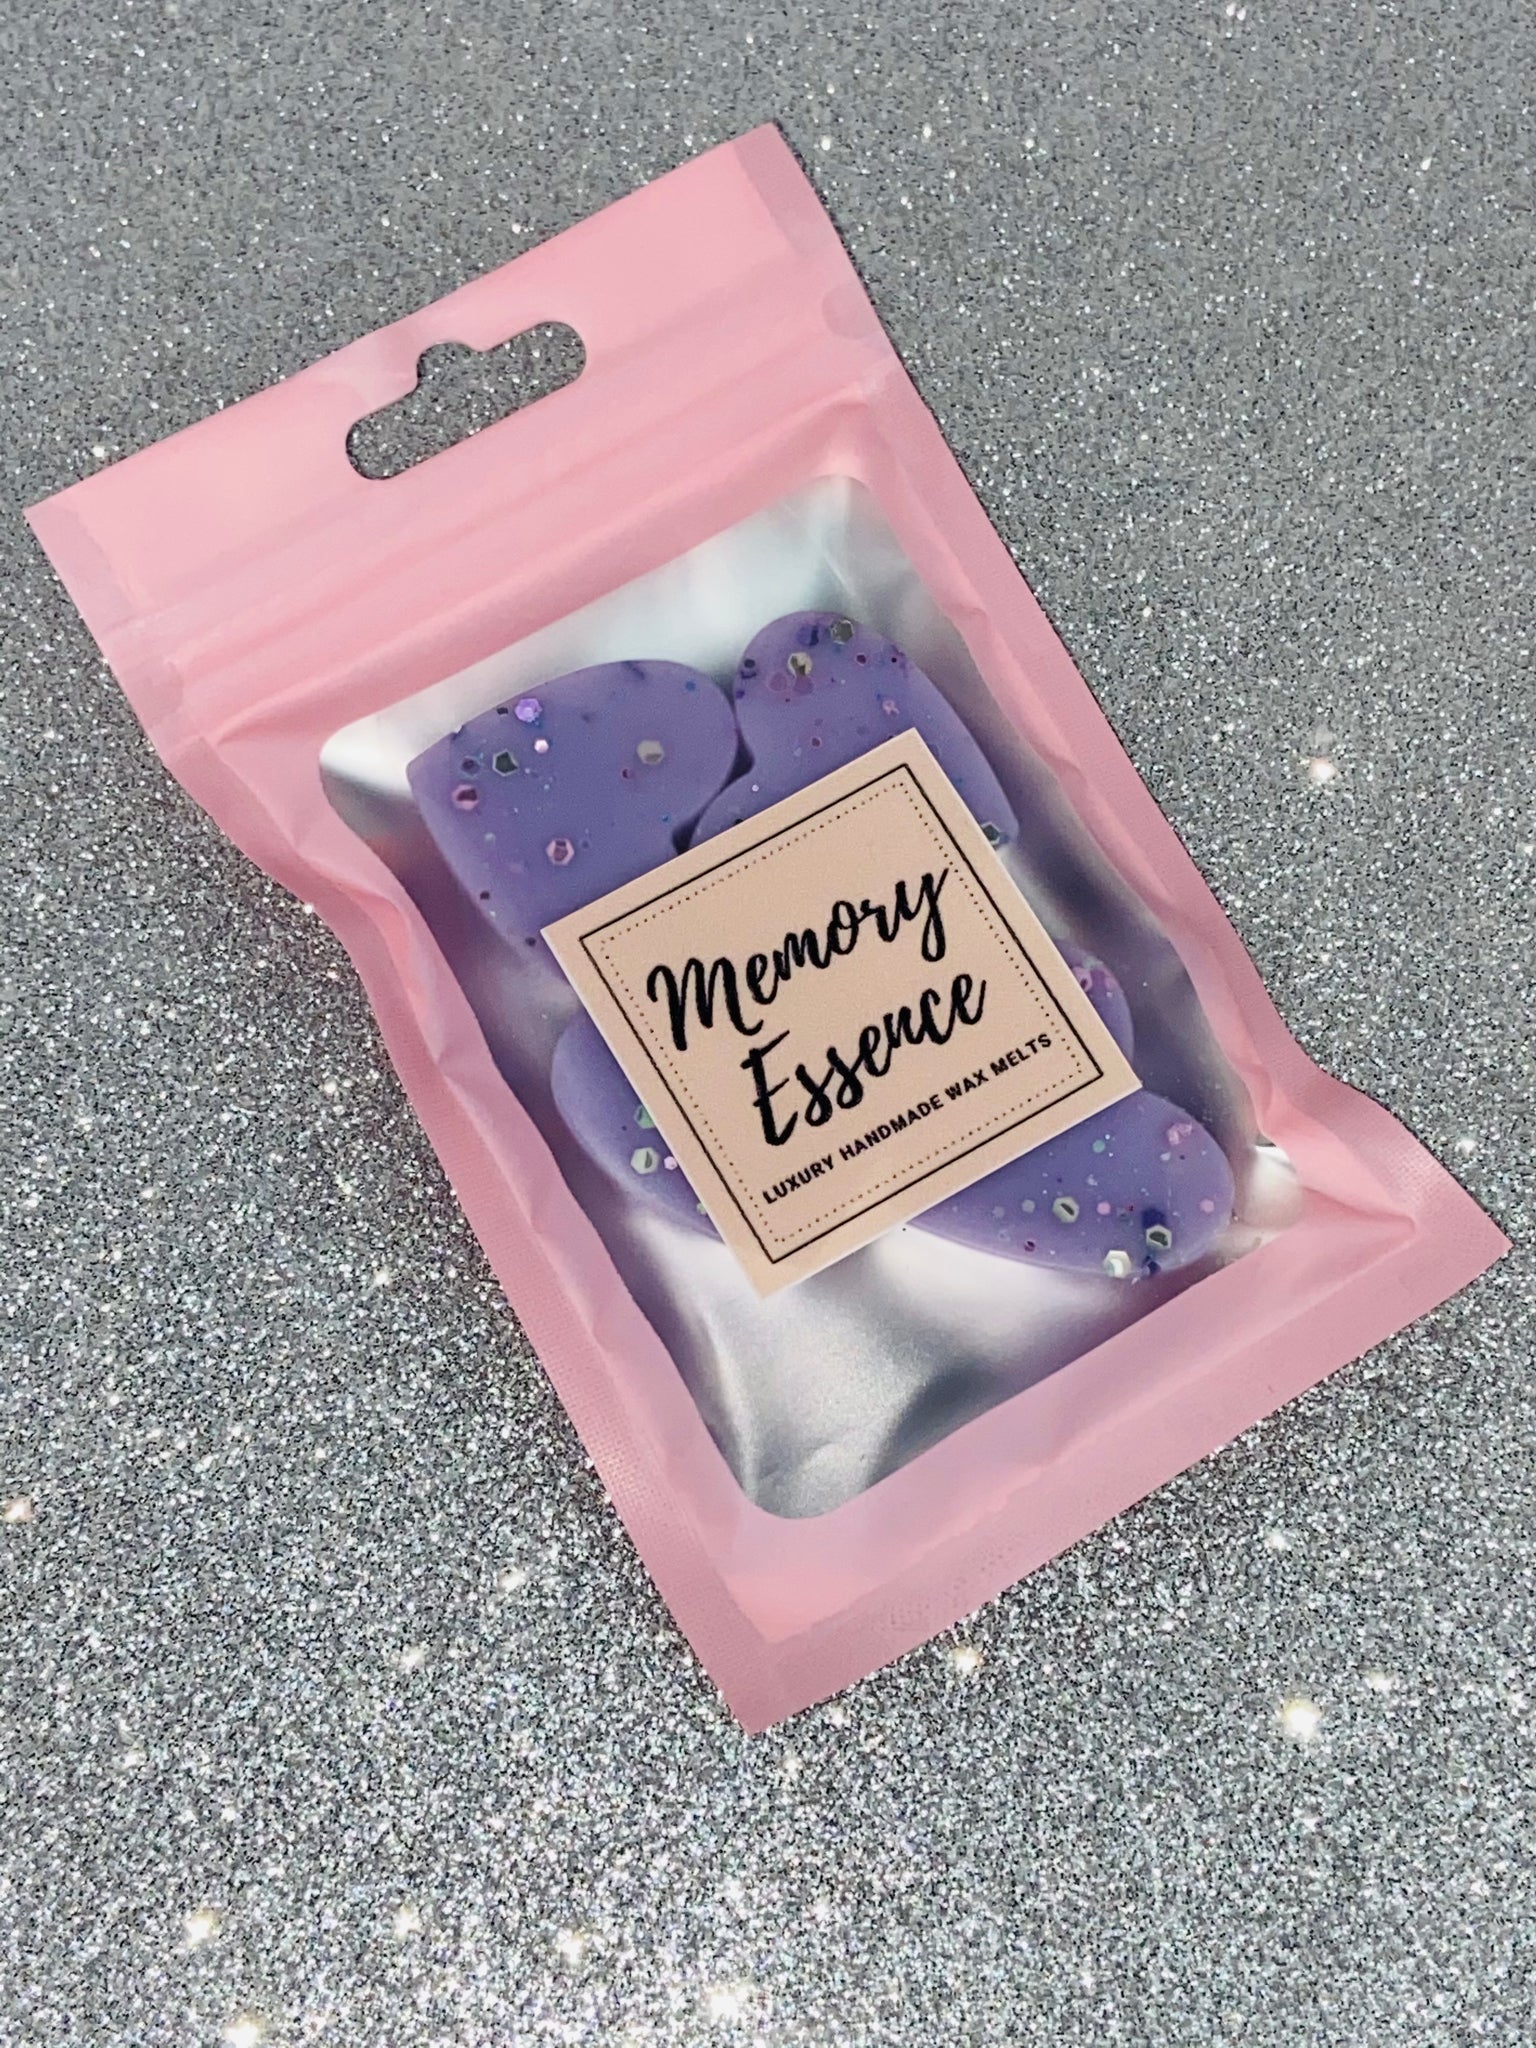 Our Unicorn Fizz wax melt is a sweet candy floss accord with sticky sweet sugar notes and hints of strawberry, raspberry, vanilla and sherbet.   Please note colours and glitter may vary as each product is uniquely handcrafted.  Net weight approx 28g